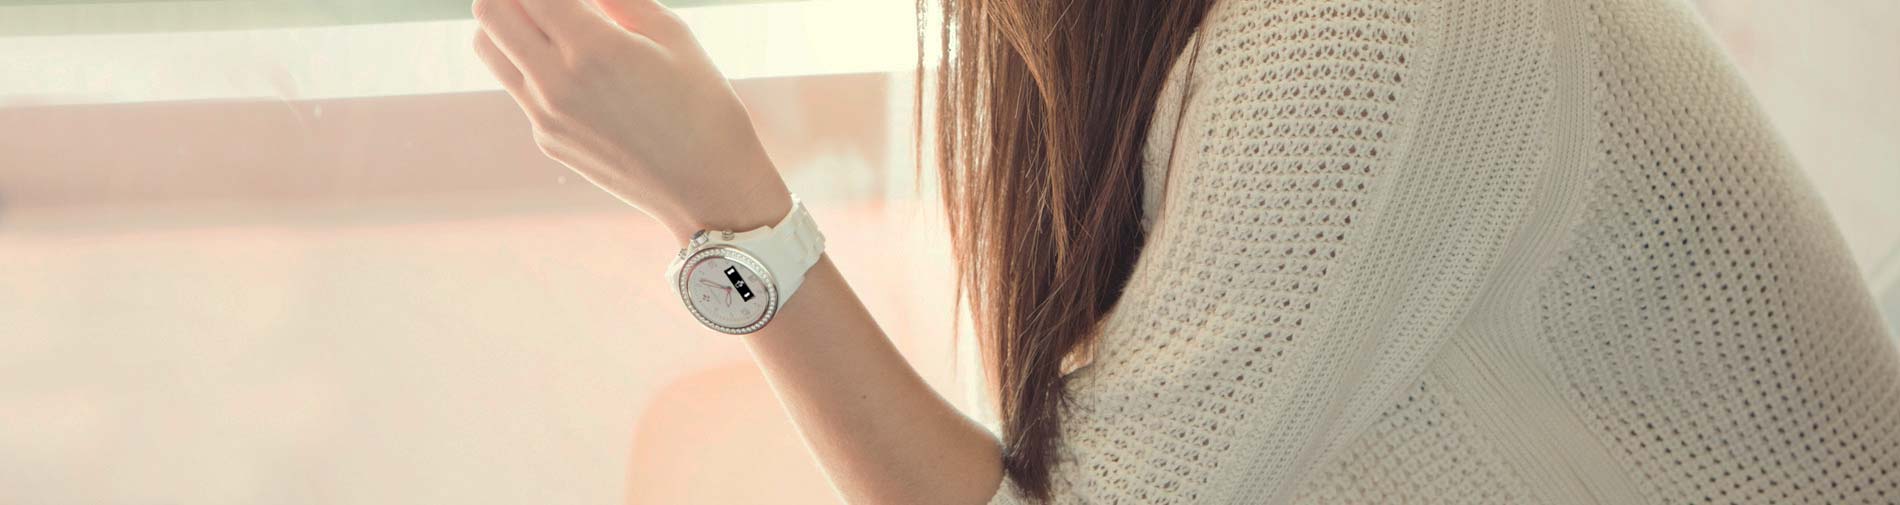 About MyKronoz, stylish, intuitive and functional smartwatch designer